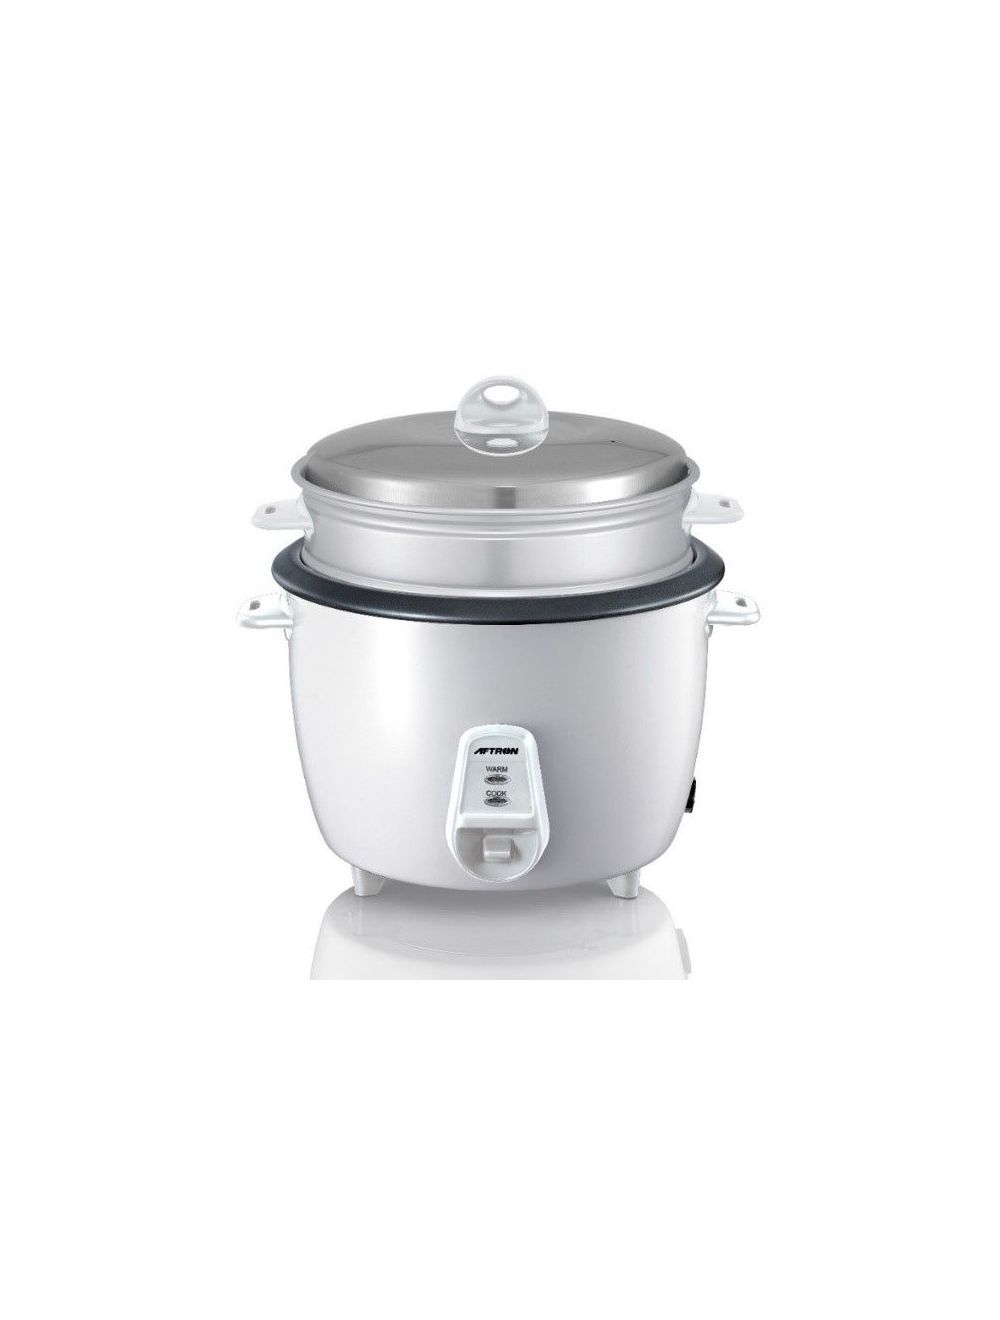 Aftron 1.8 L Rice Cooker, White-AFRC1800N